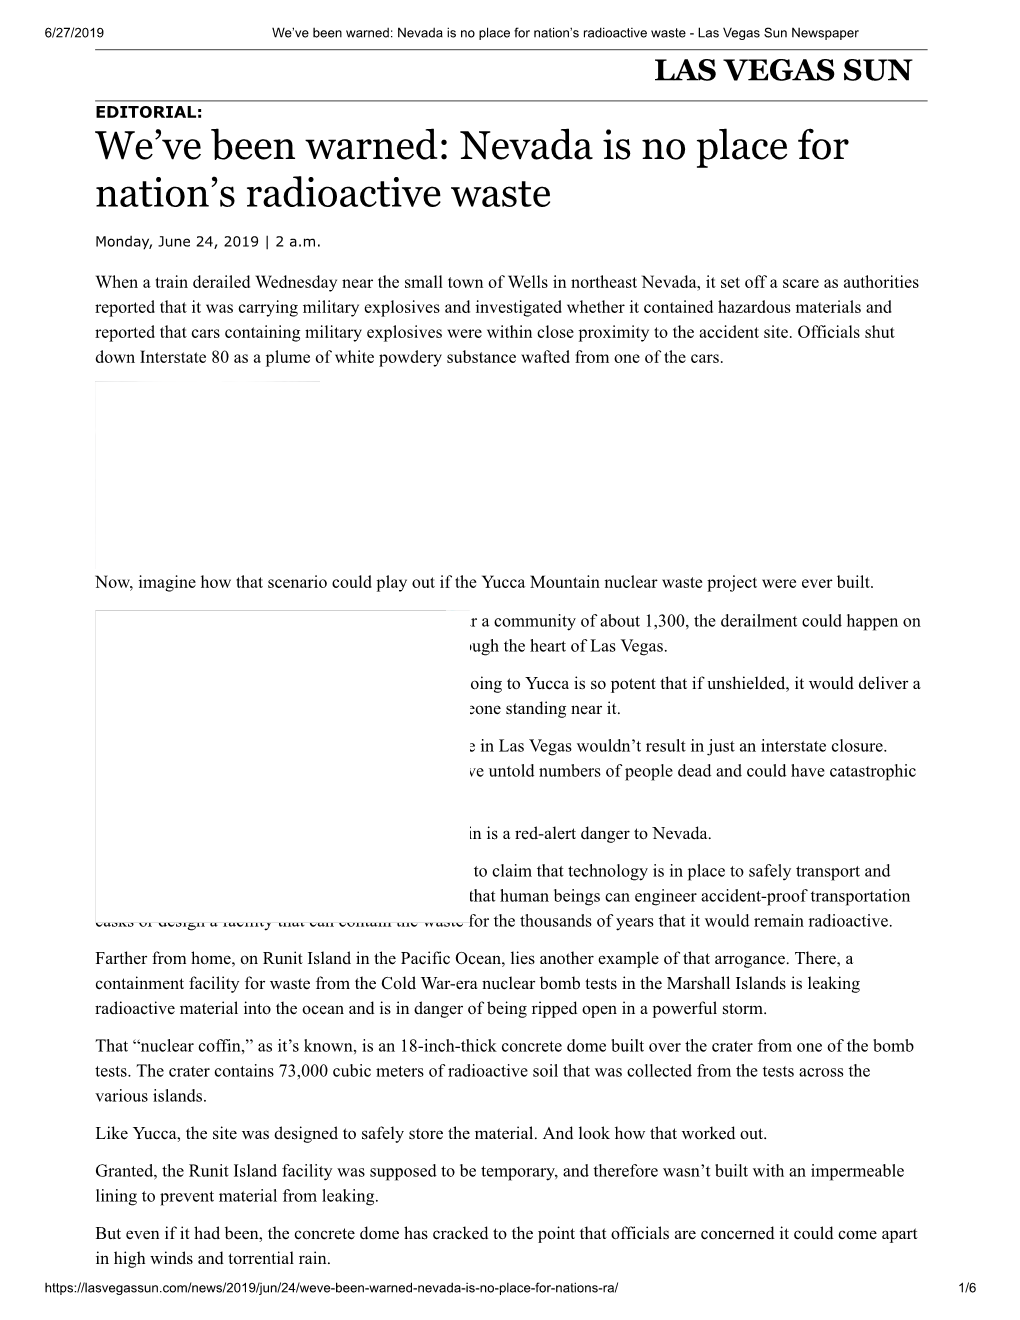 Nevada Is No Place for Nation's Radioactive Waste